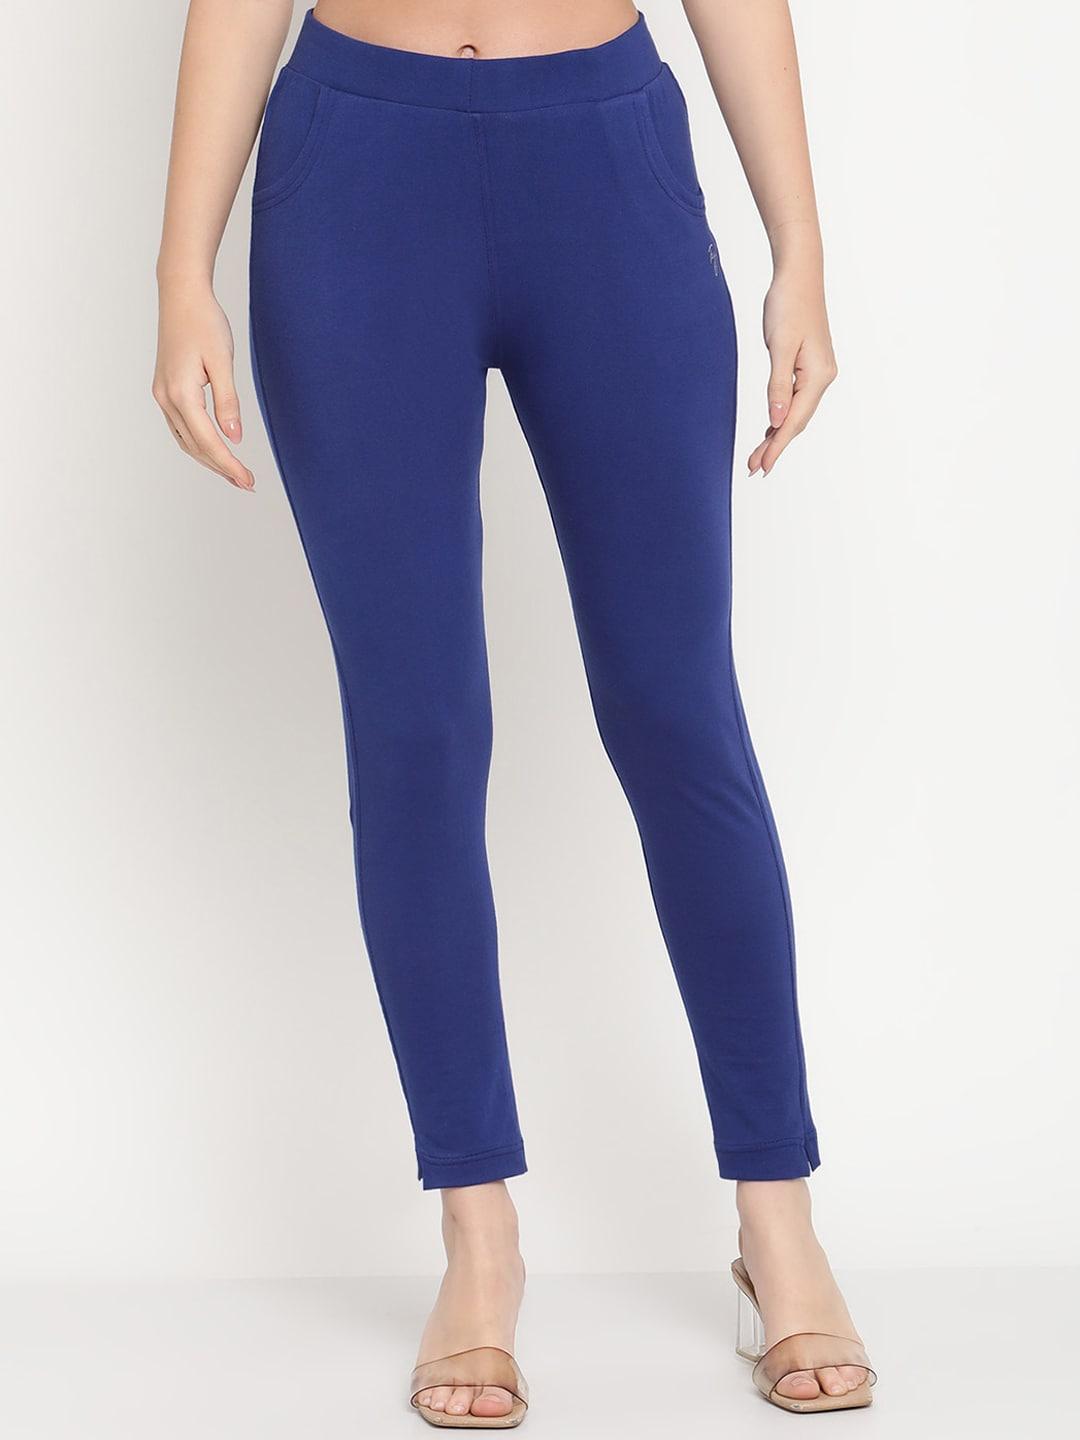 TAG 7 Women Blue Solid Ankle-Length Leggings